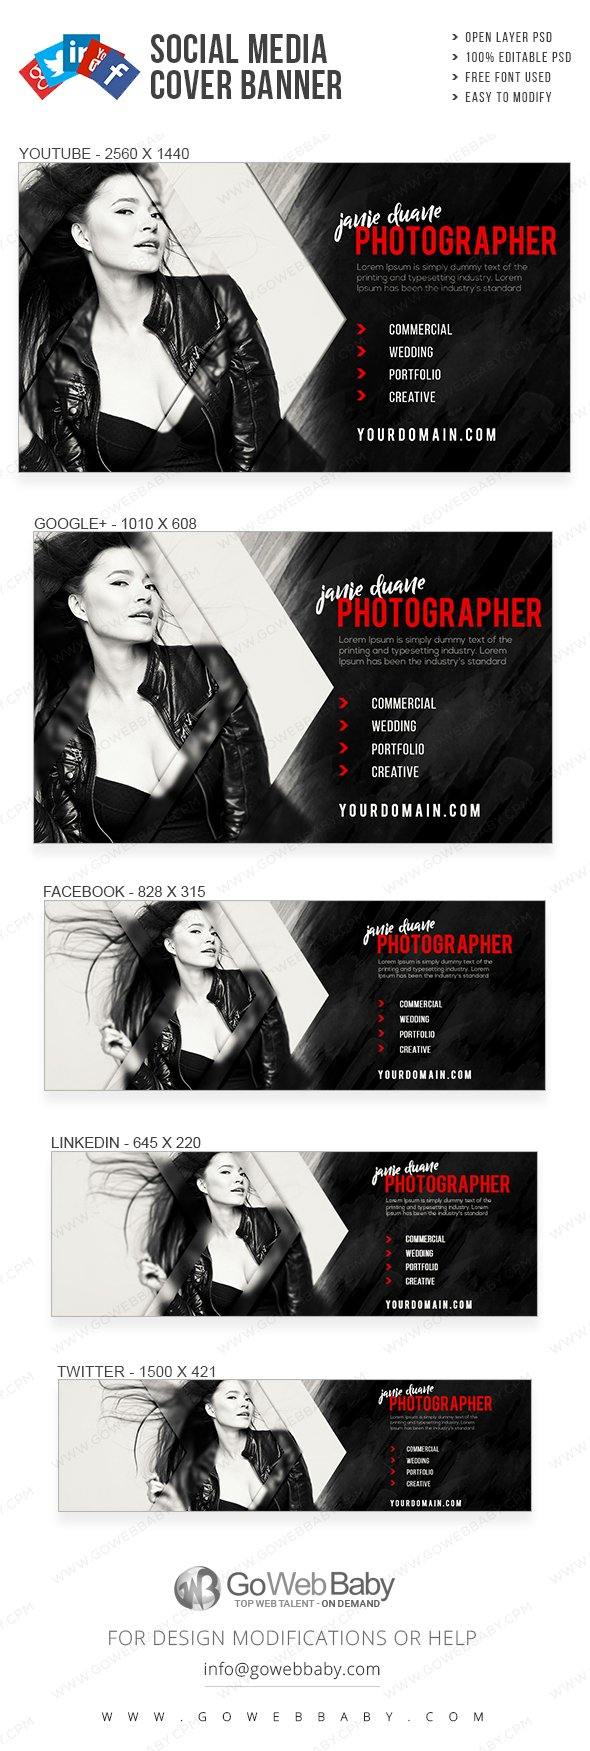 Social Media Cover Banner - Creative Photography For Website Marketing - GoWebBaby.Com